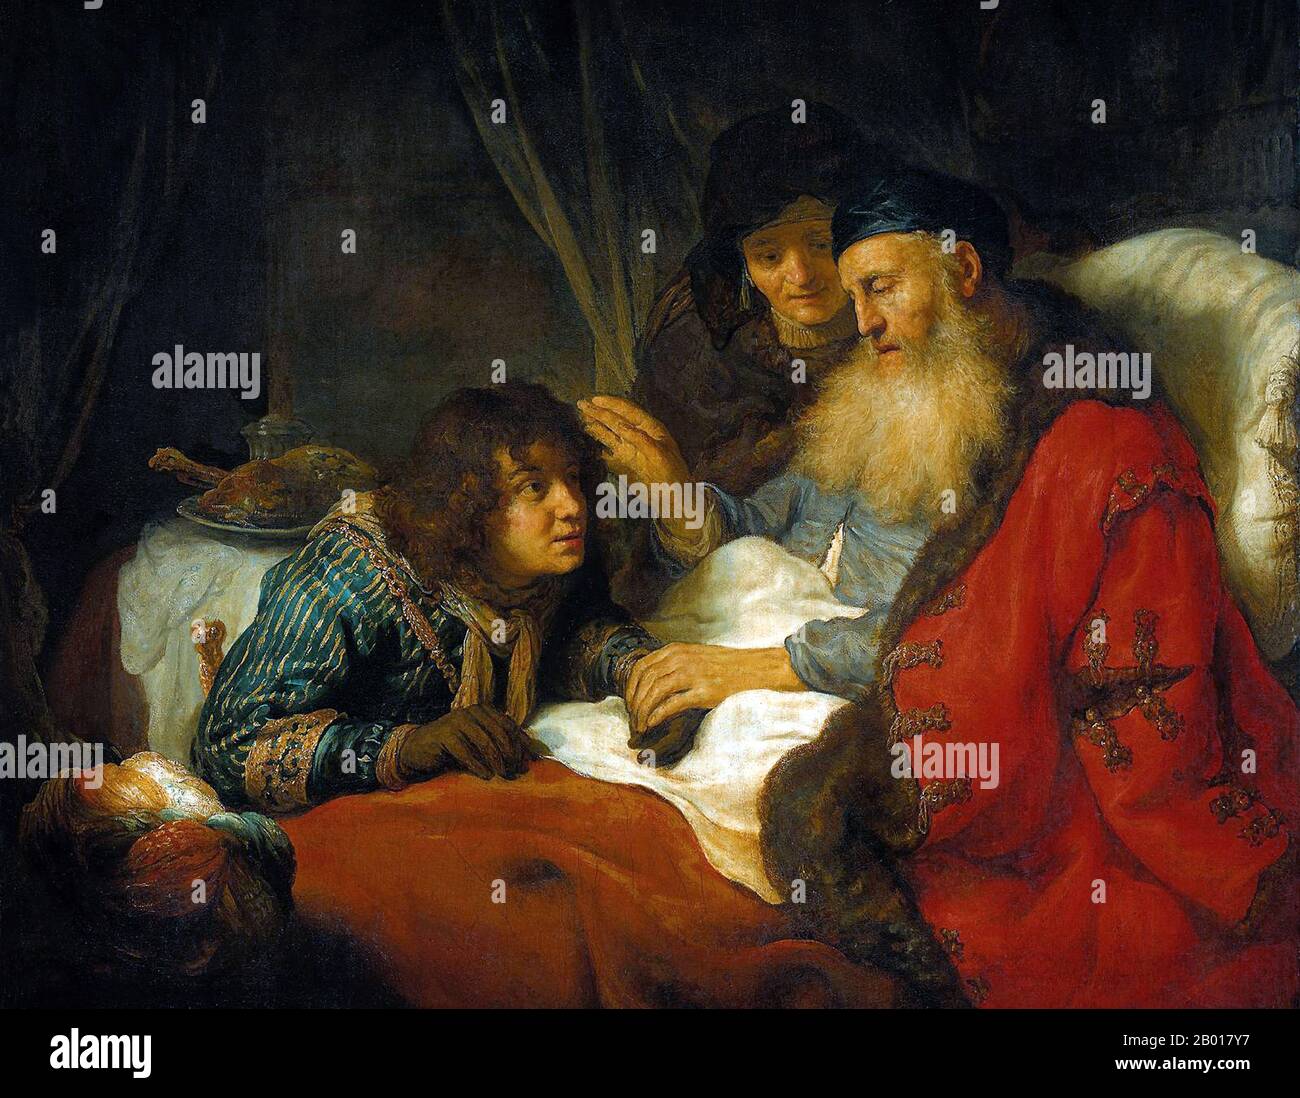 Netherlands: ‘Isaac Blessing Jacob’. Oil on canvas painting by Govert Flinck (25 January 1615 - 2 February 1660), 1638.  In a famous scene from the Hebrew Bible, or Christian Old Testament, Isaac, the only son of Abraham and Sarah, blesses his younger son Jacob from his deathbed.  Now Isaac is old and blind, and thinks he is blessing his elder son, Esau. Jacob has covered his hands in goatskin in imitation of his hirsute brother Esau to trick his father. Jacob’s mother, Rebecca, looks on anxiously. She is an accomplice to Jacob’s scheme. Stock Photo